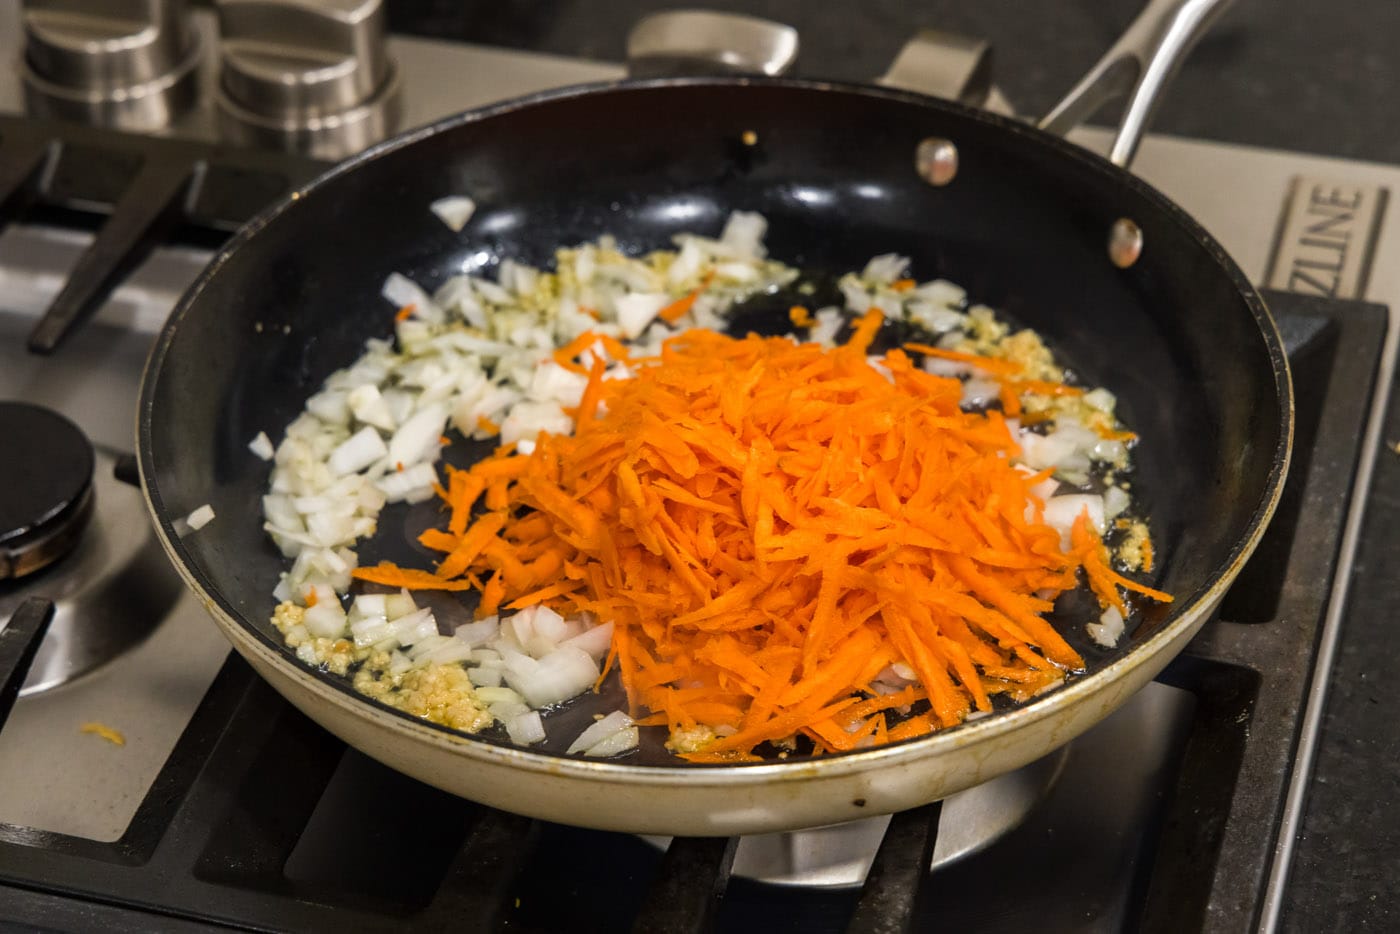 garlic, onion, and carrot added to skillet